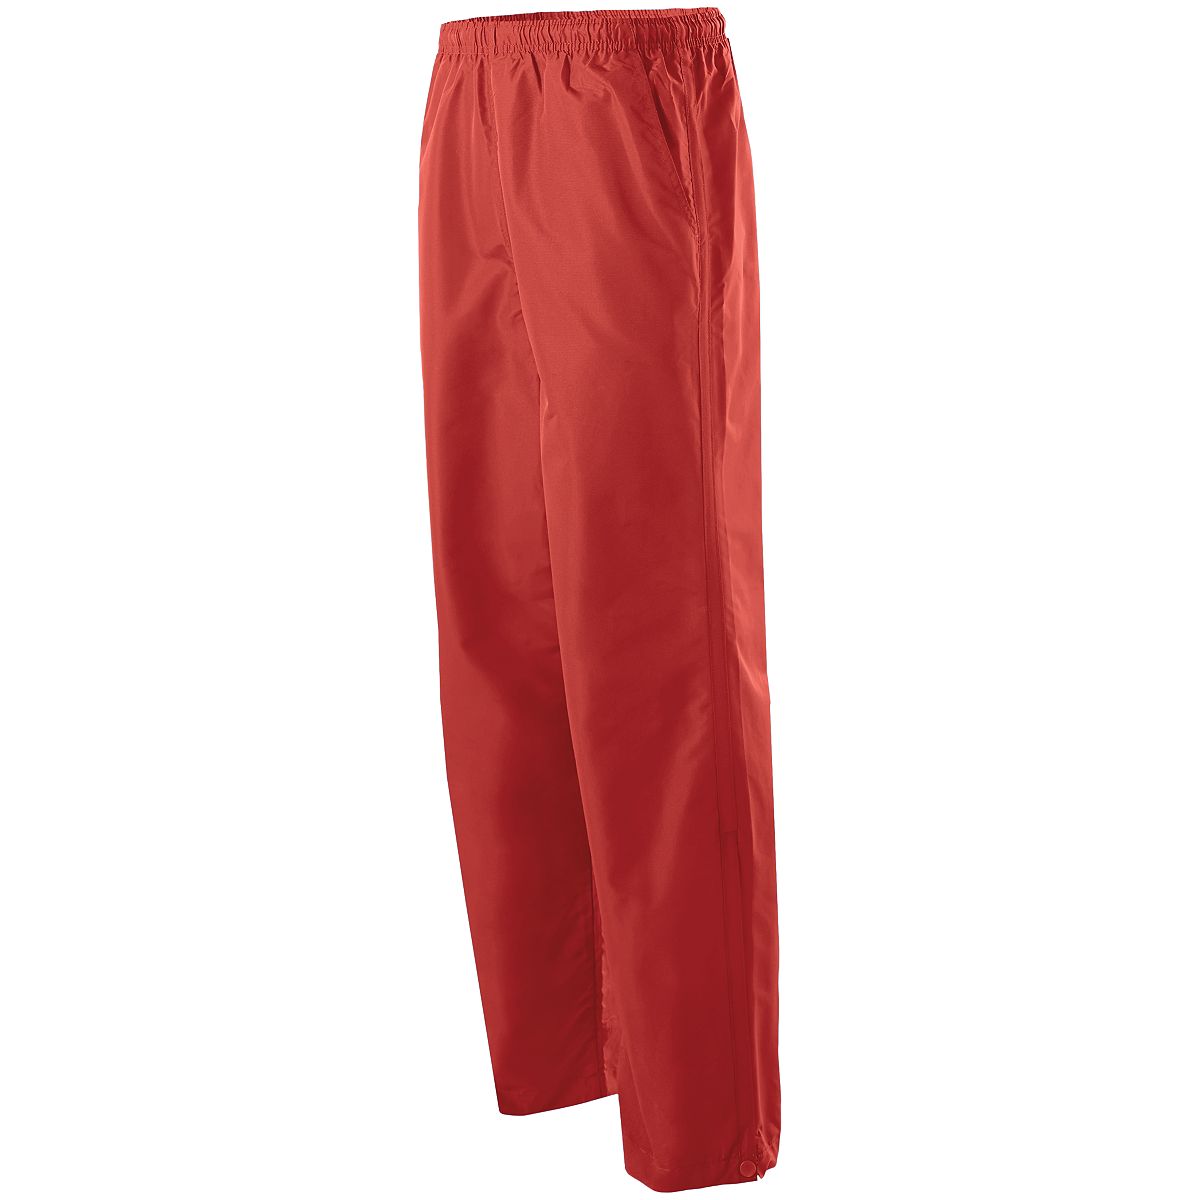 Pacer Pant